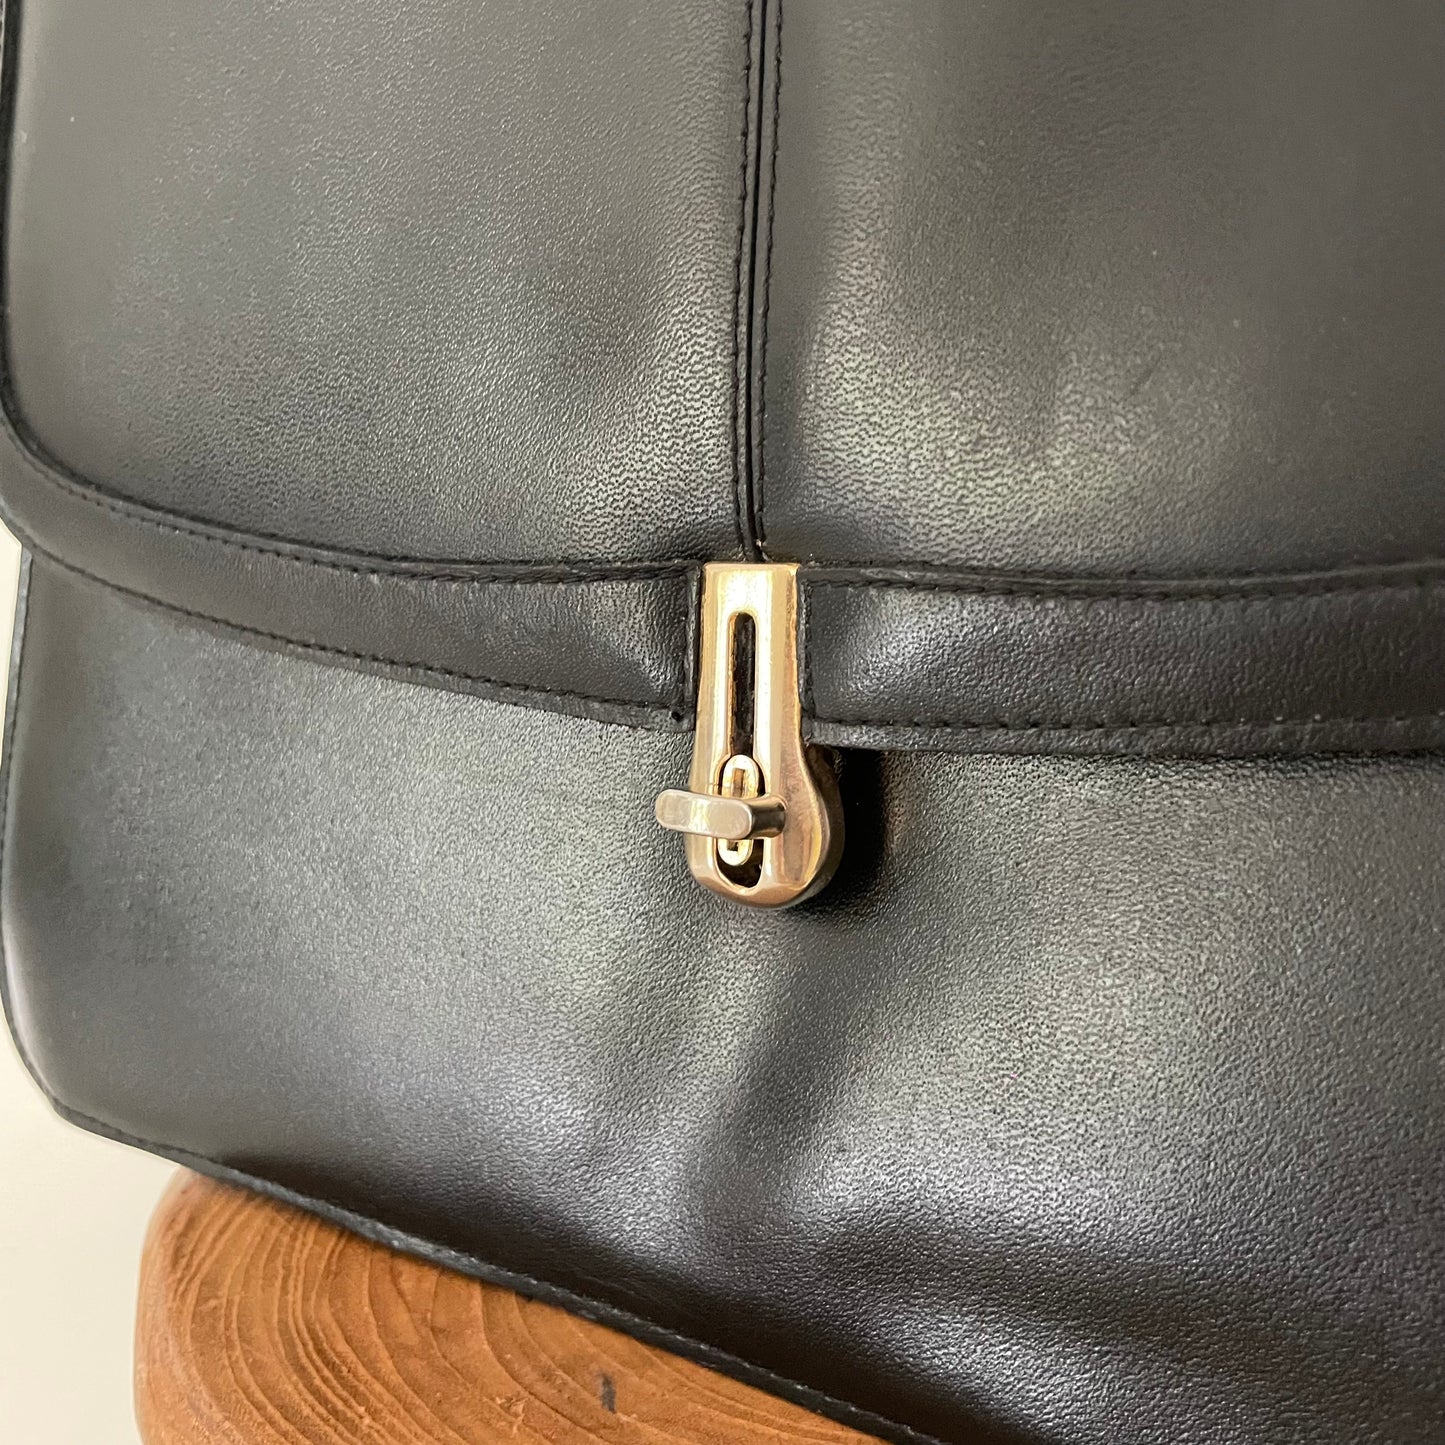 Vintage 1970s Large black leather bag with front clasp from England